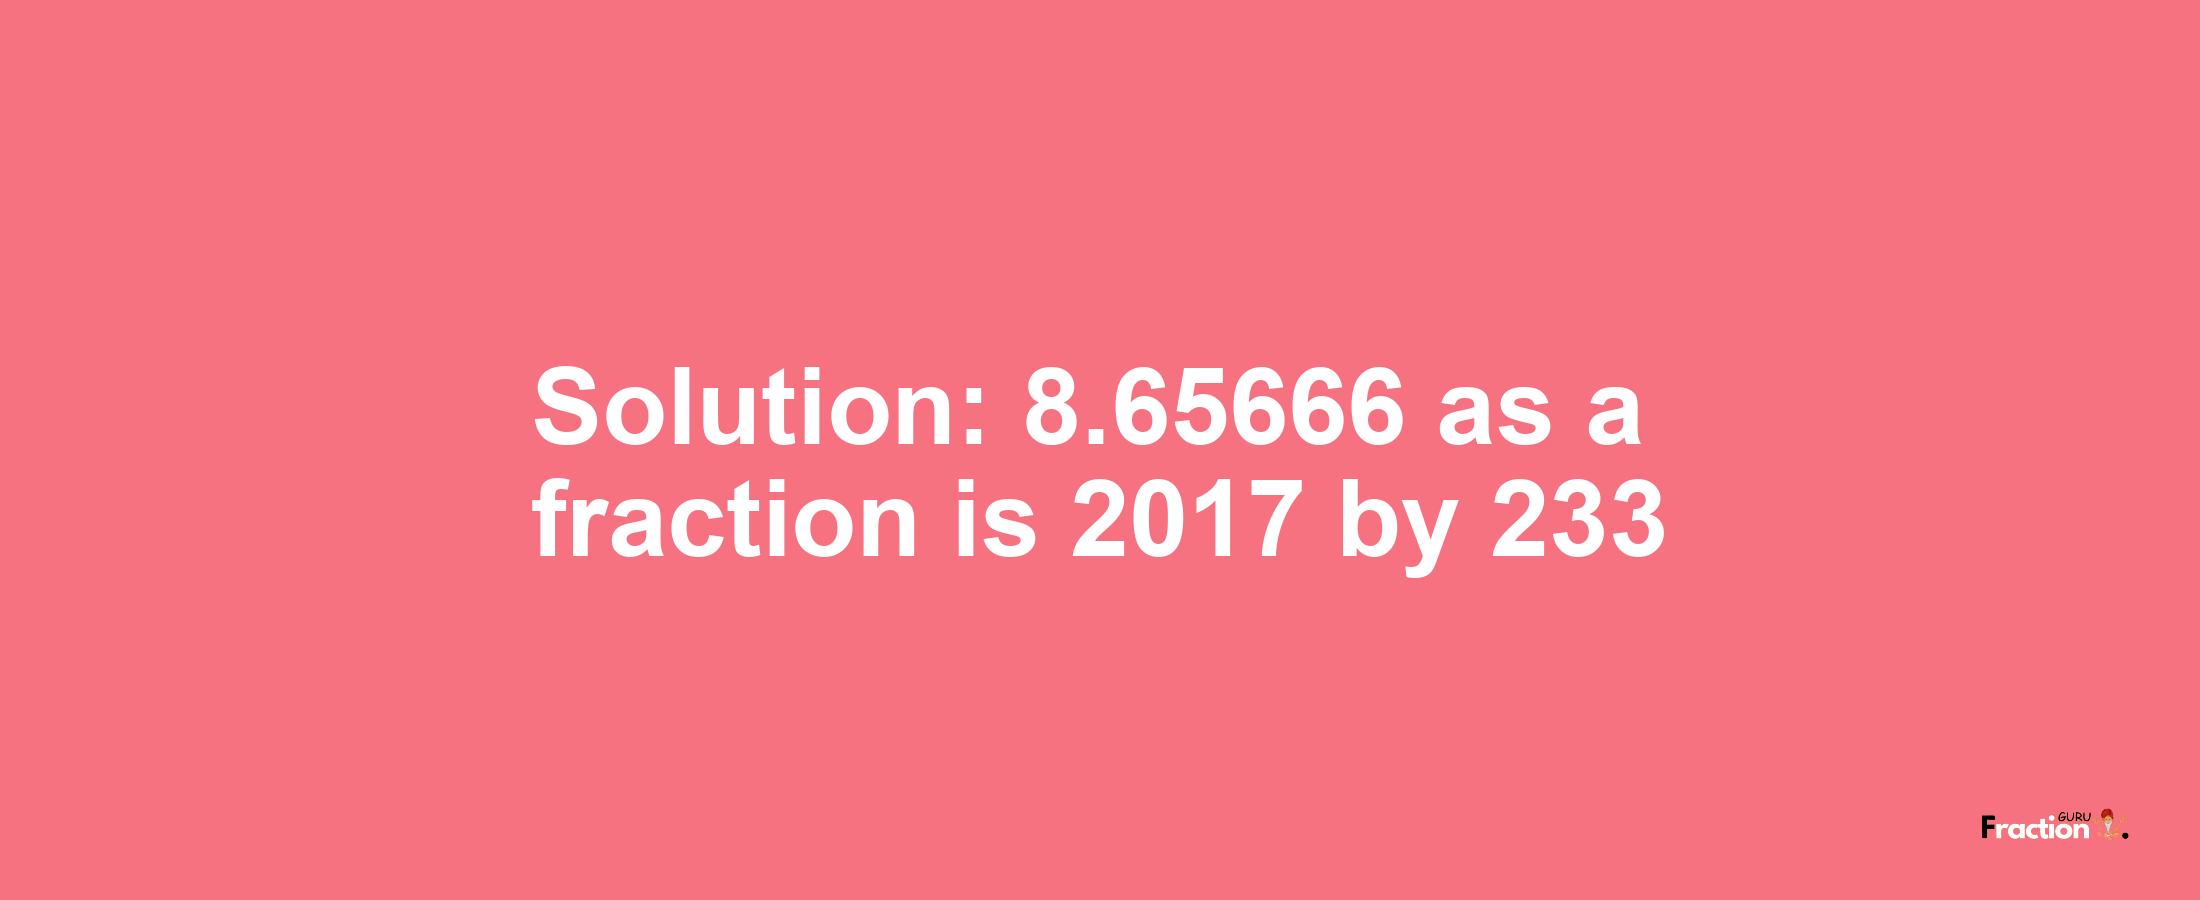 Solution:8.65666 as a fraction is 2017/233